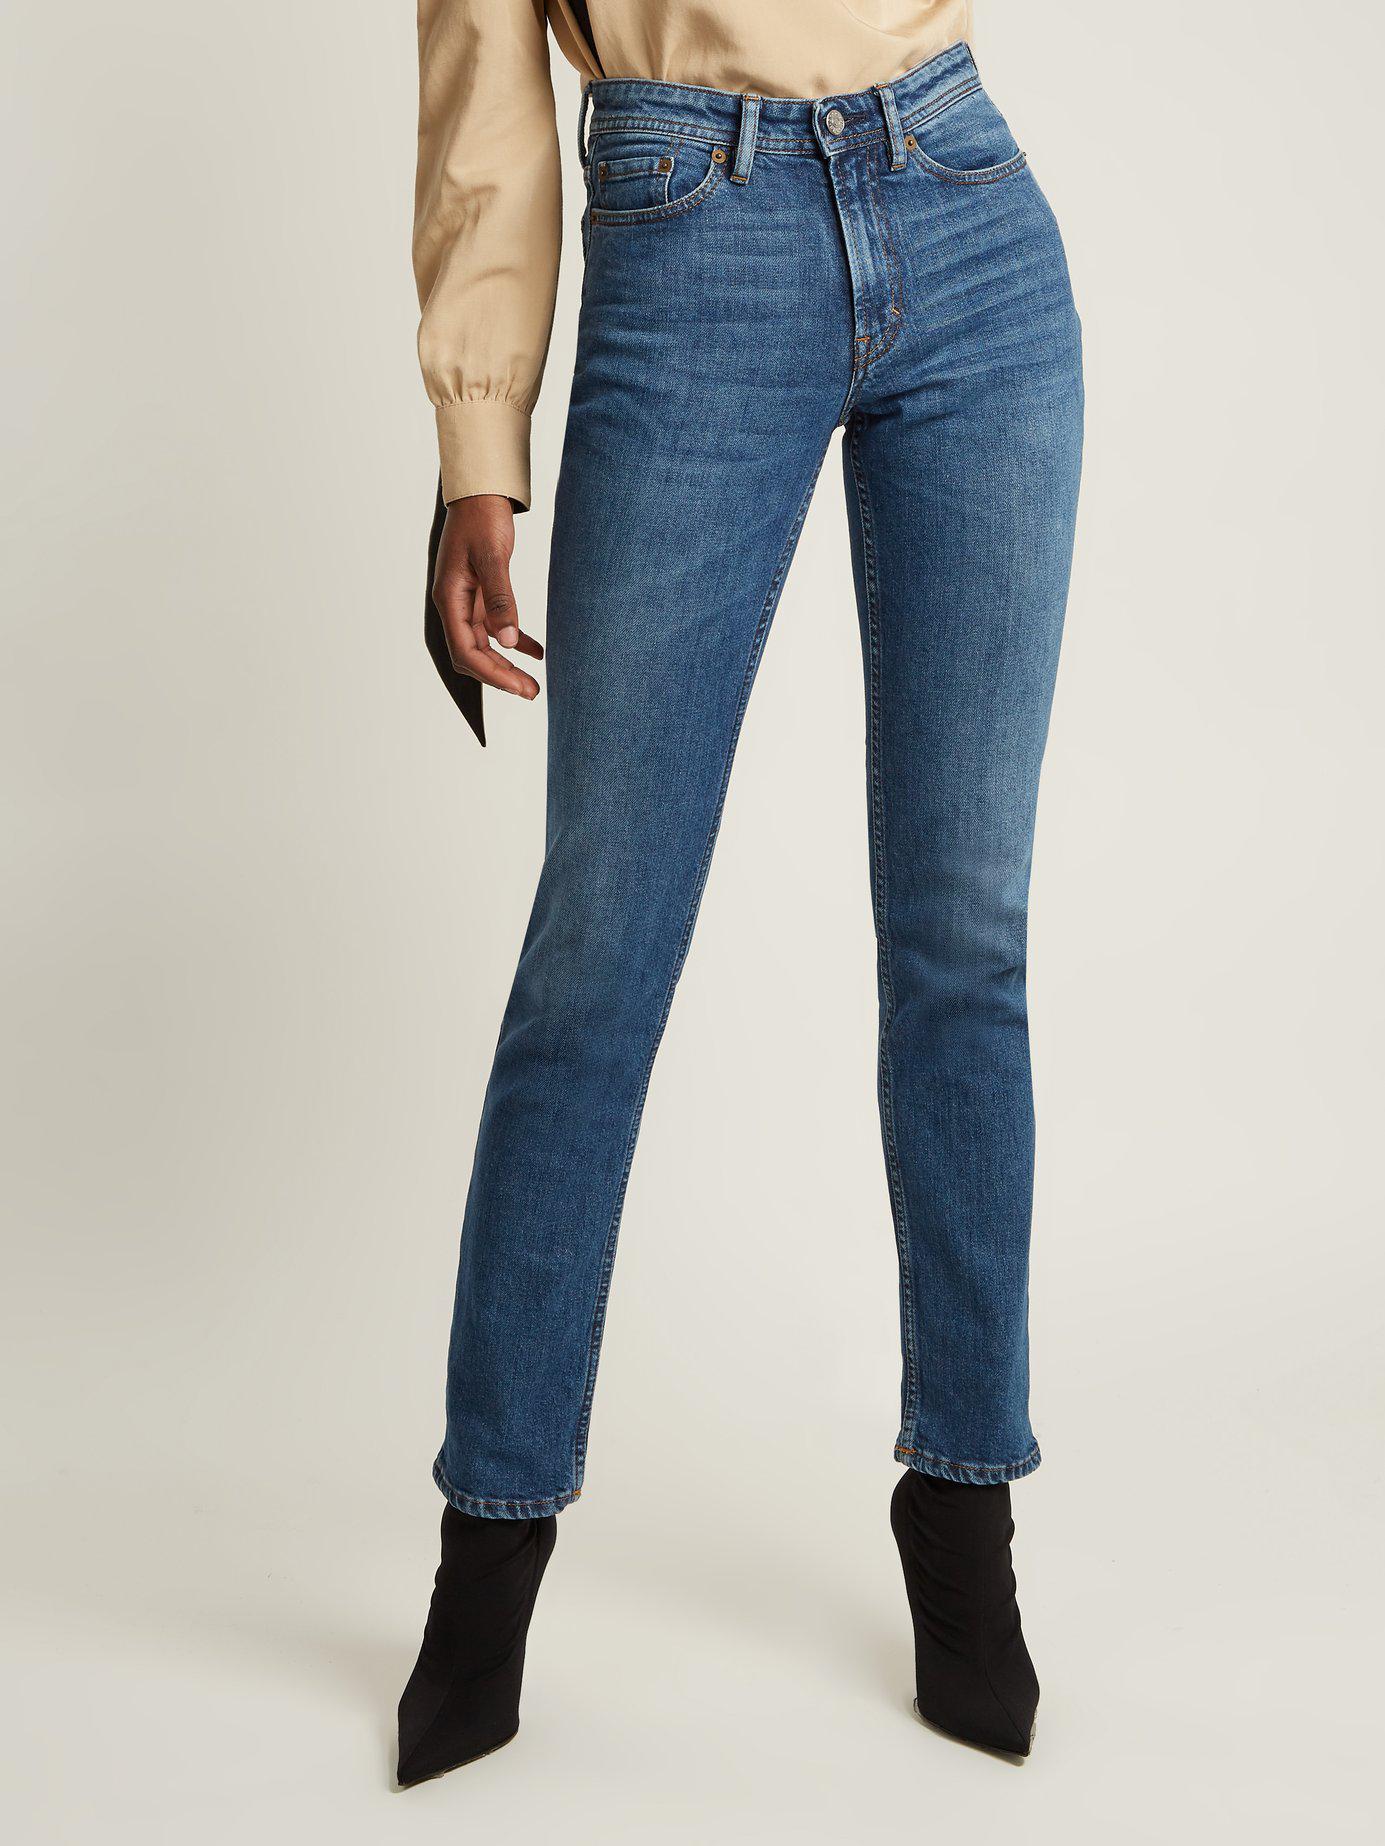 Acne Studios Denim South Mid-rise Straight-leg Jeans in Mid Blue 